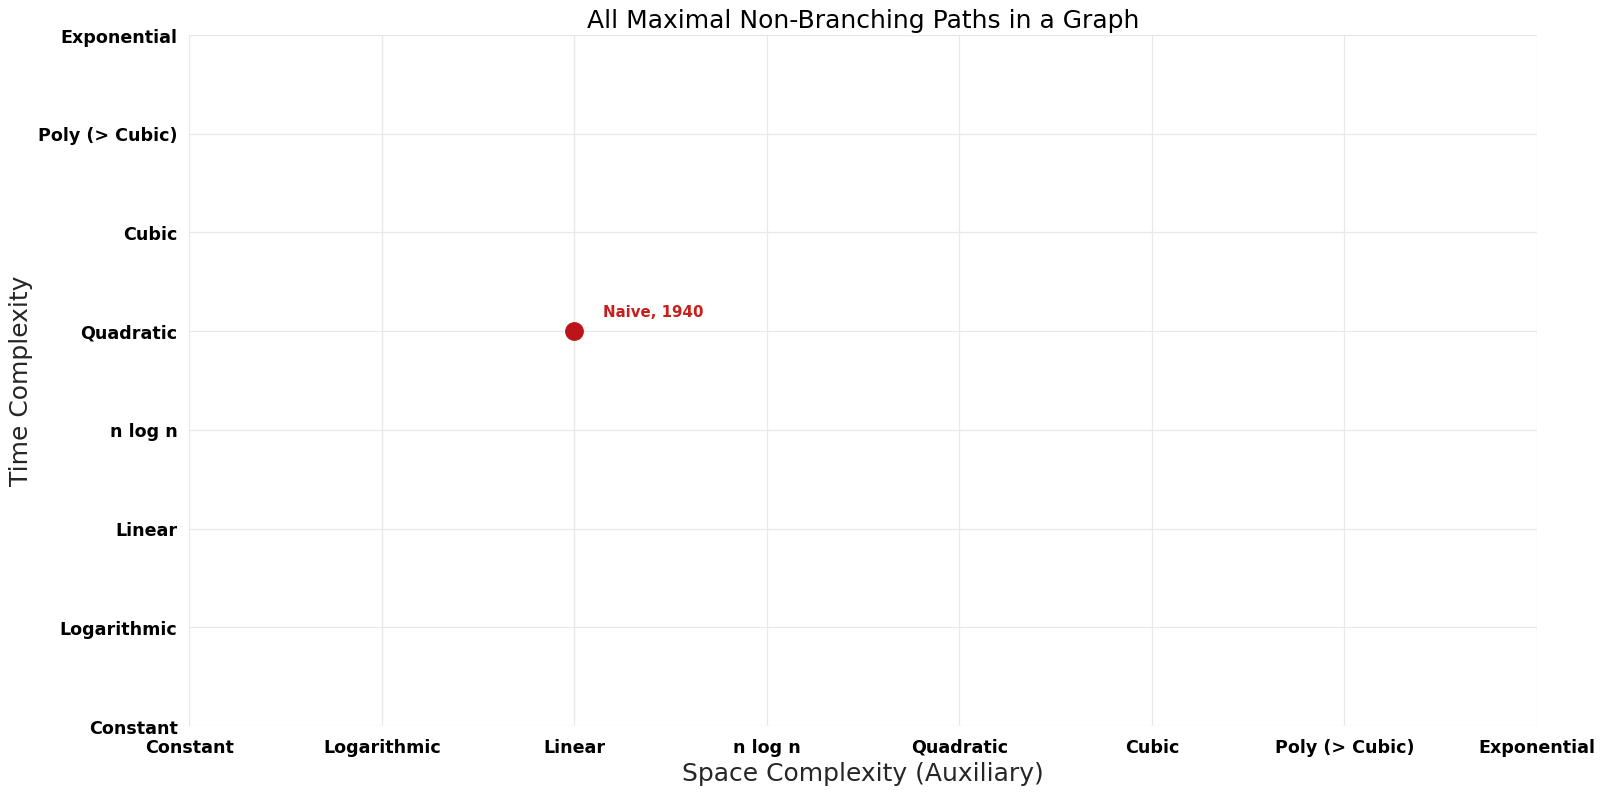 All Maximal Non-Branching Paths in a Graph - Pareto Frontier.png